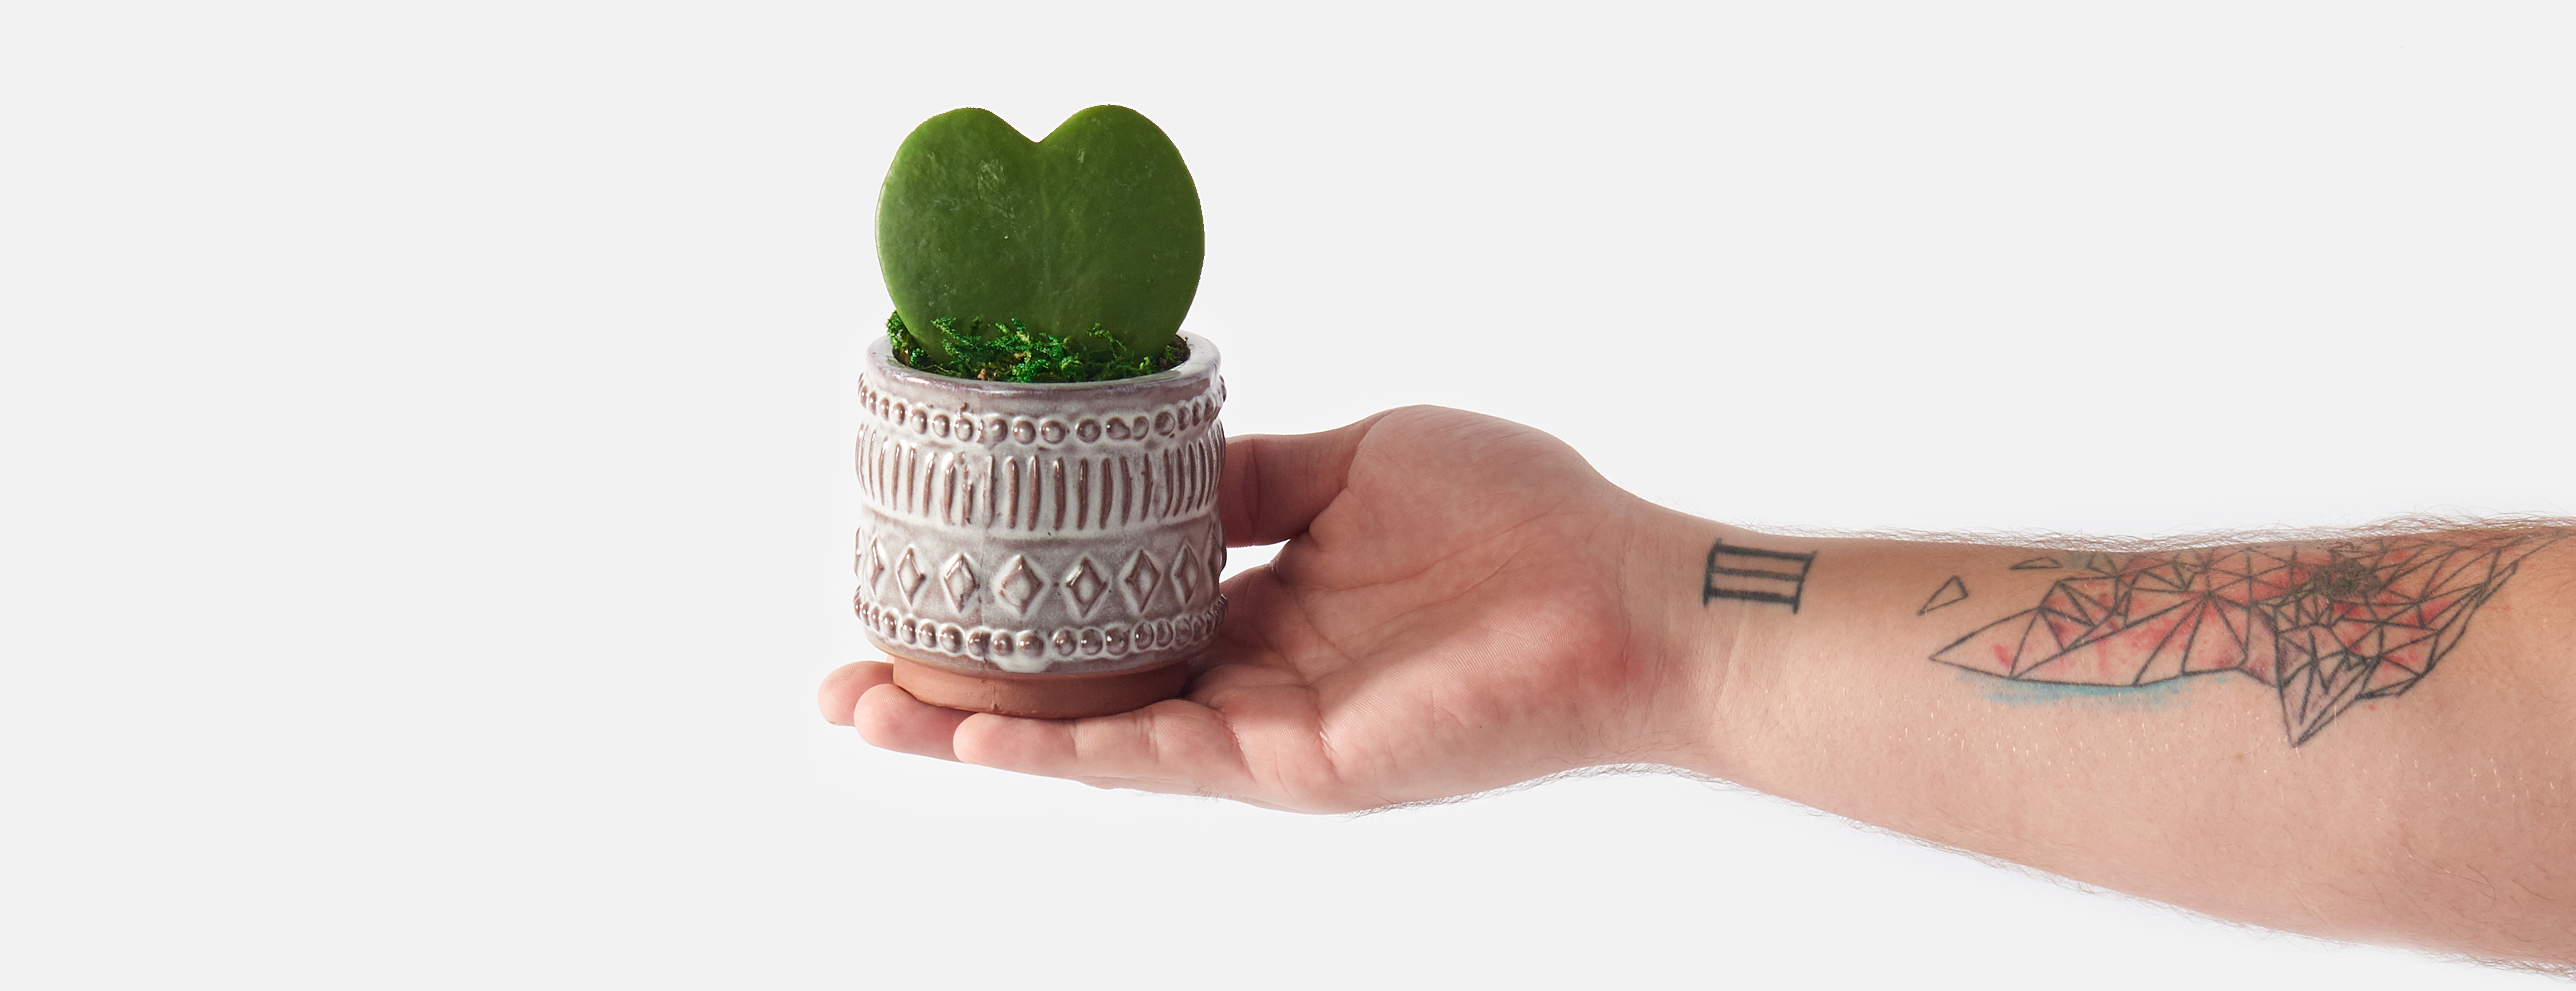 Hand holding a succulent plant